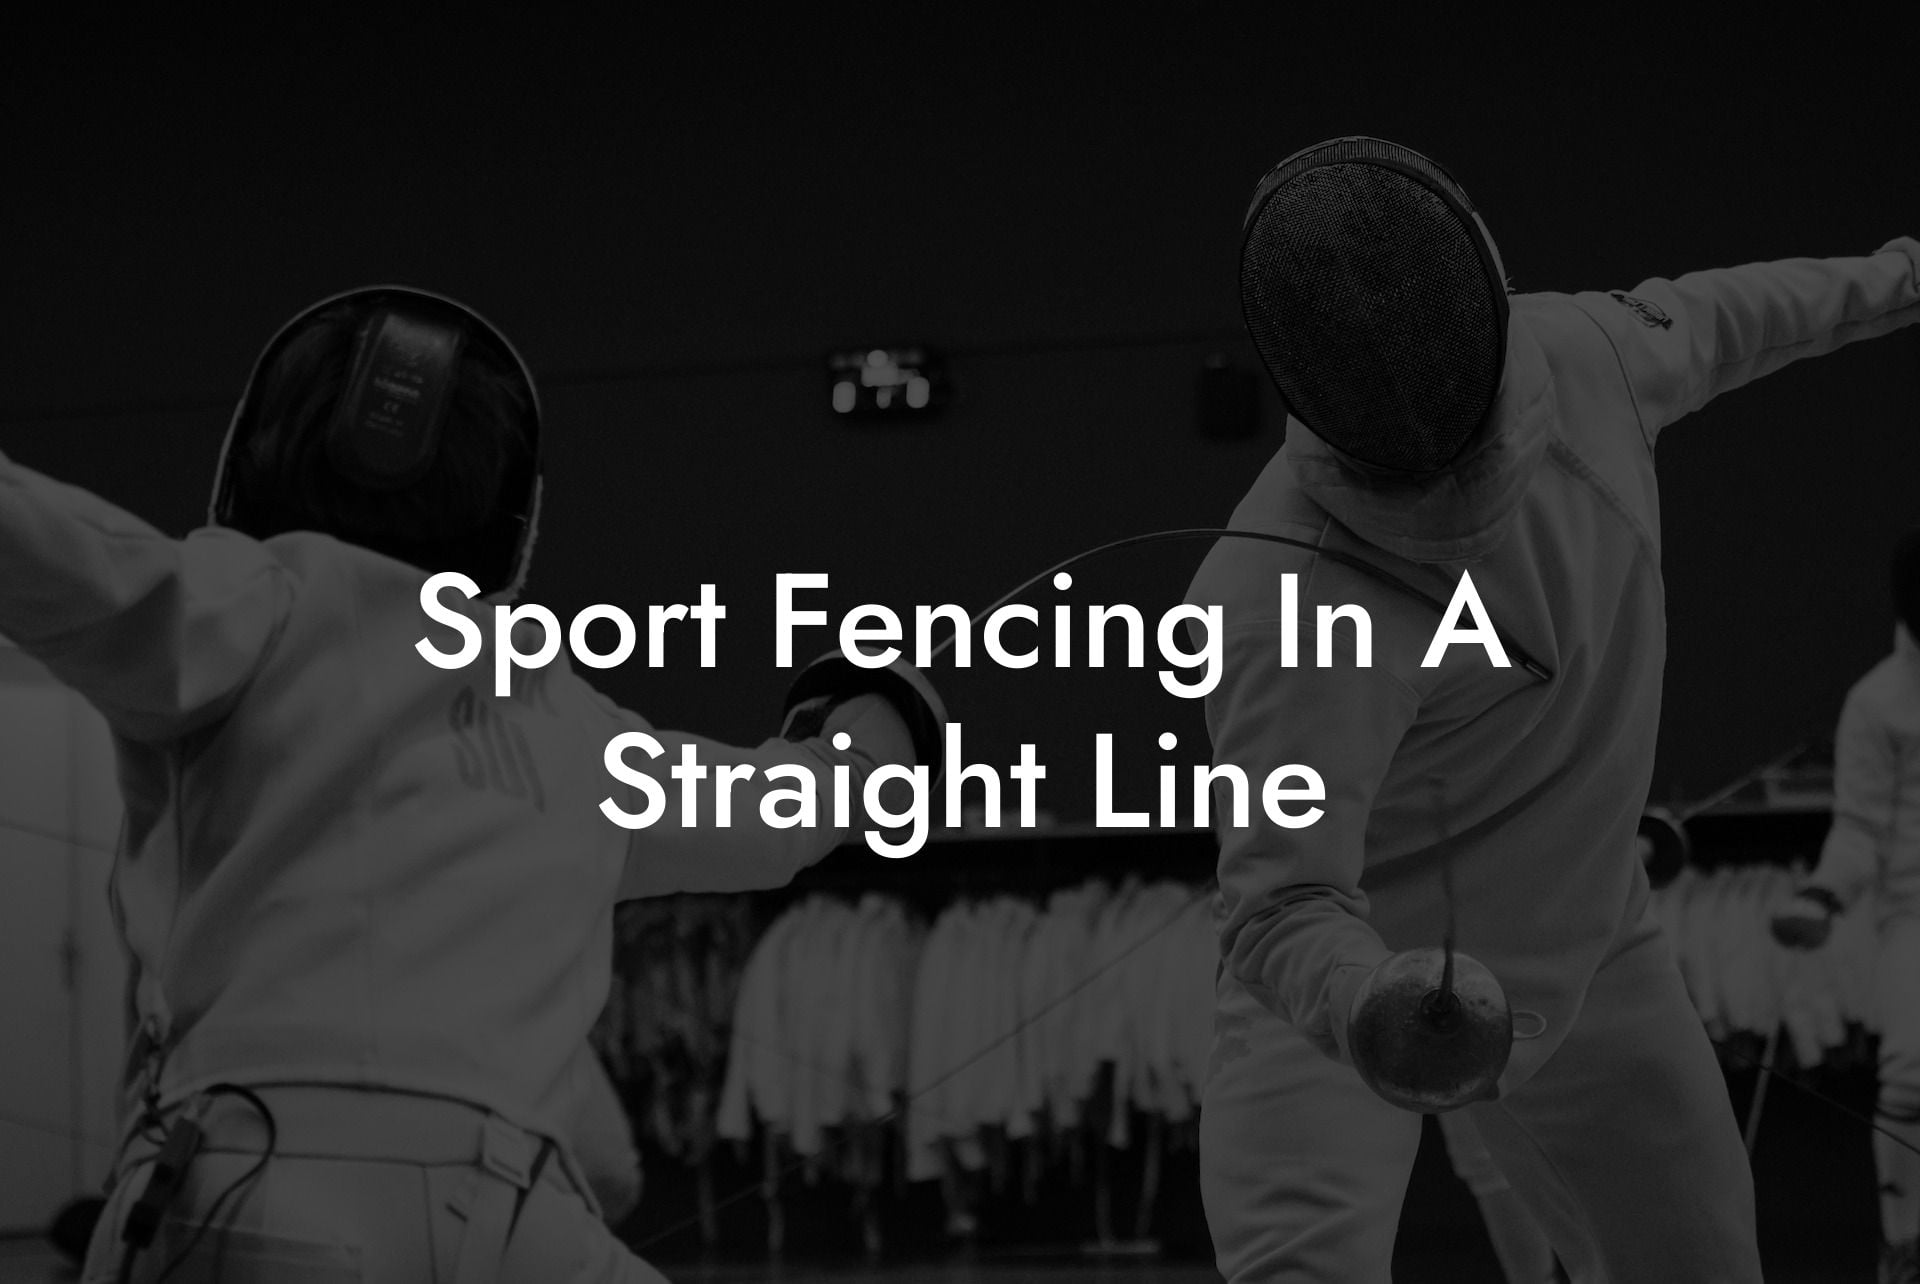 Sport Fencing In A Straight Line